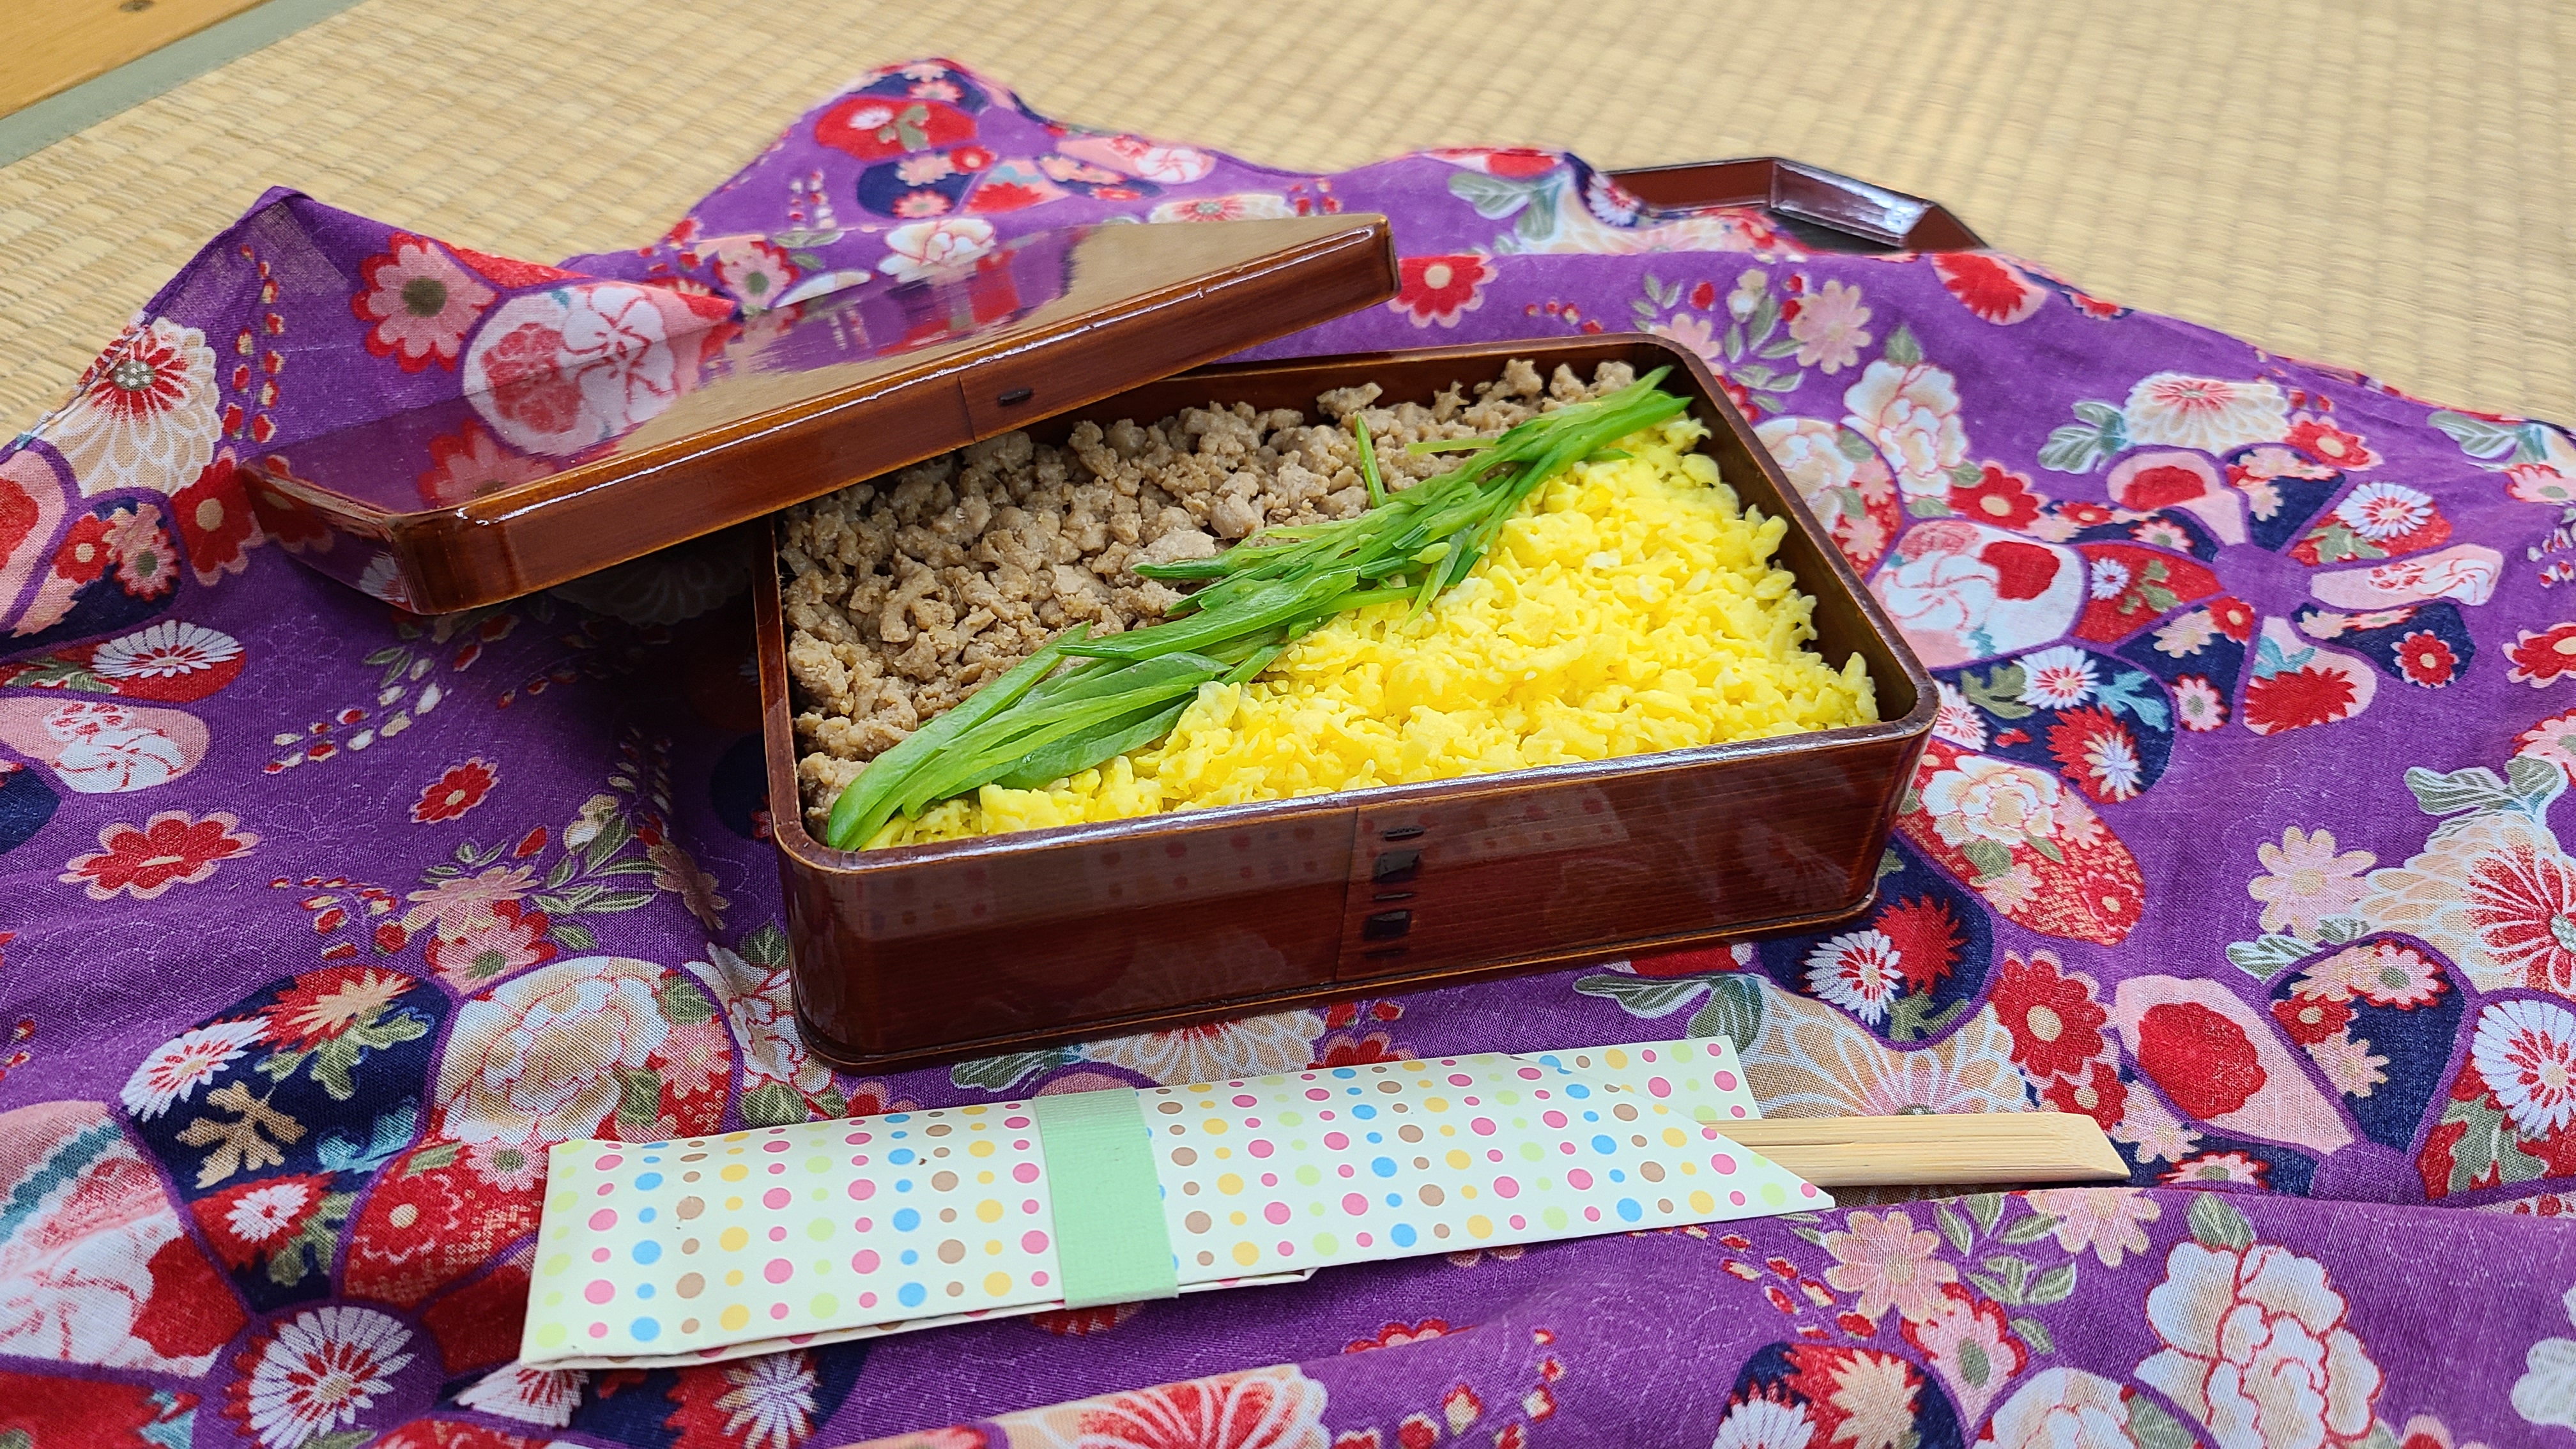 Ground chicken and egg in a bento box